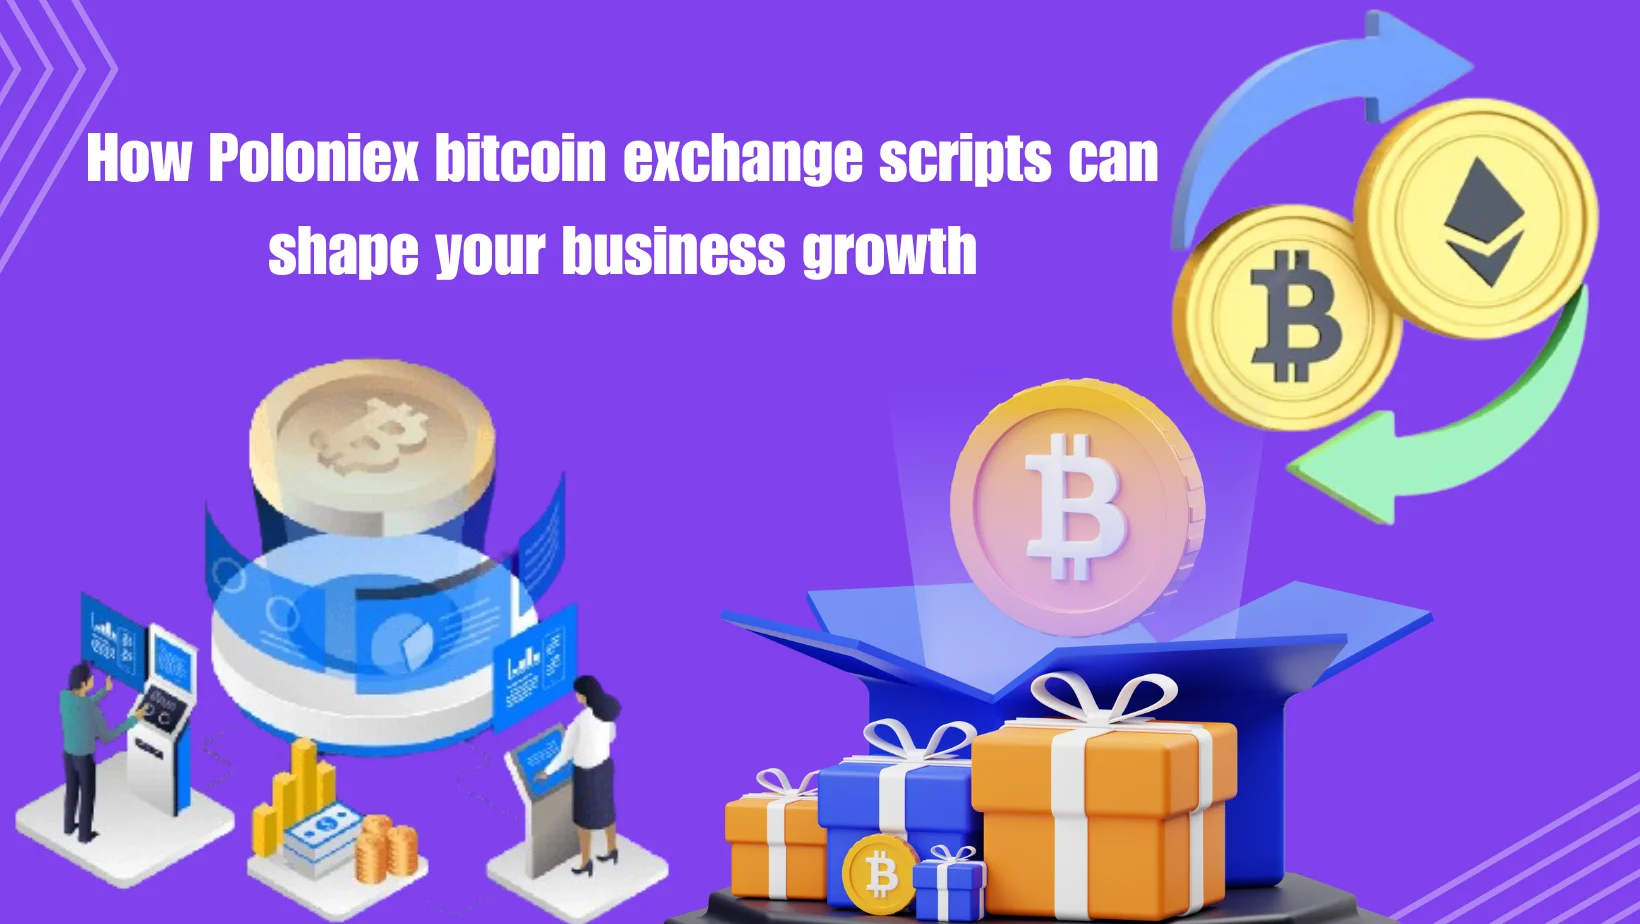 Poloniex bitcoin exchange scripts can shape your business growth with secure and scalable solutions.